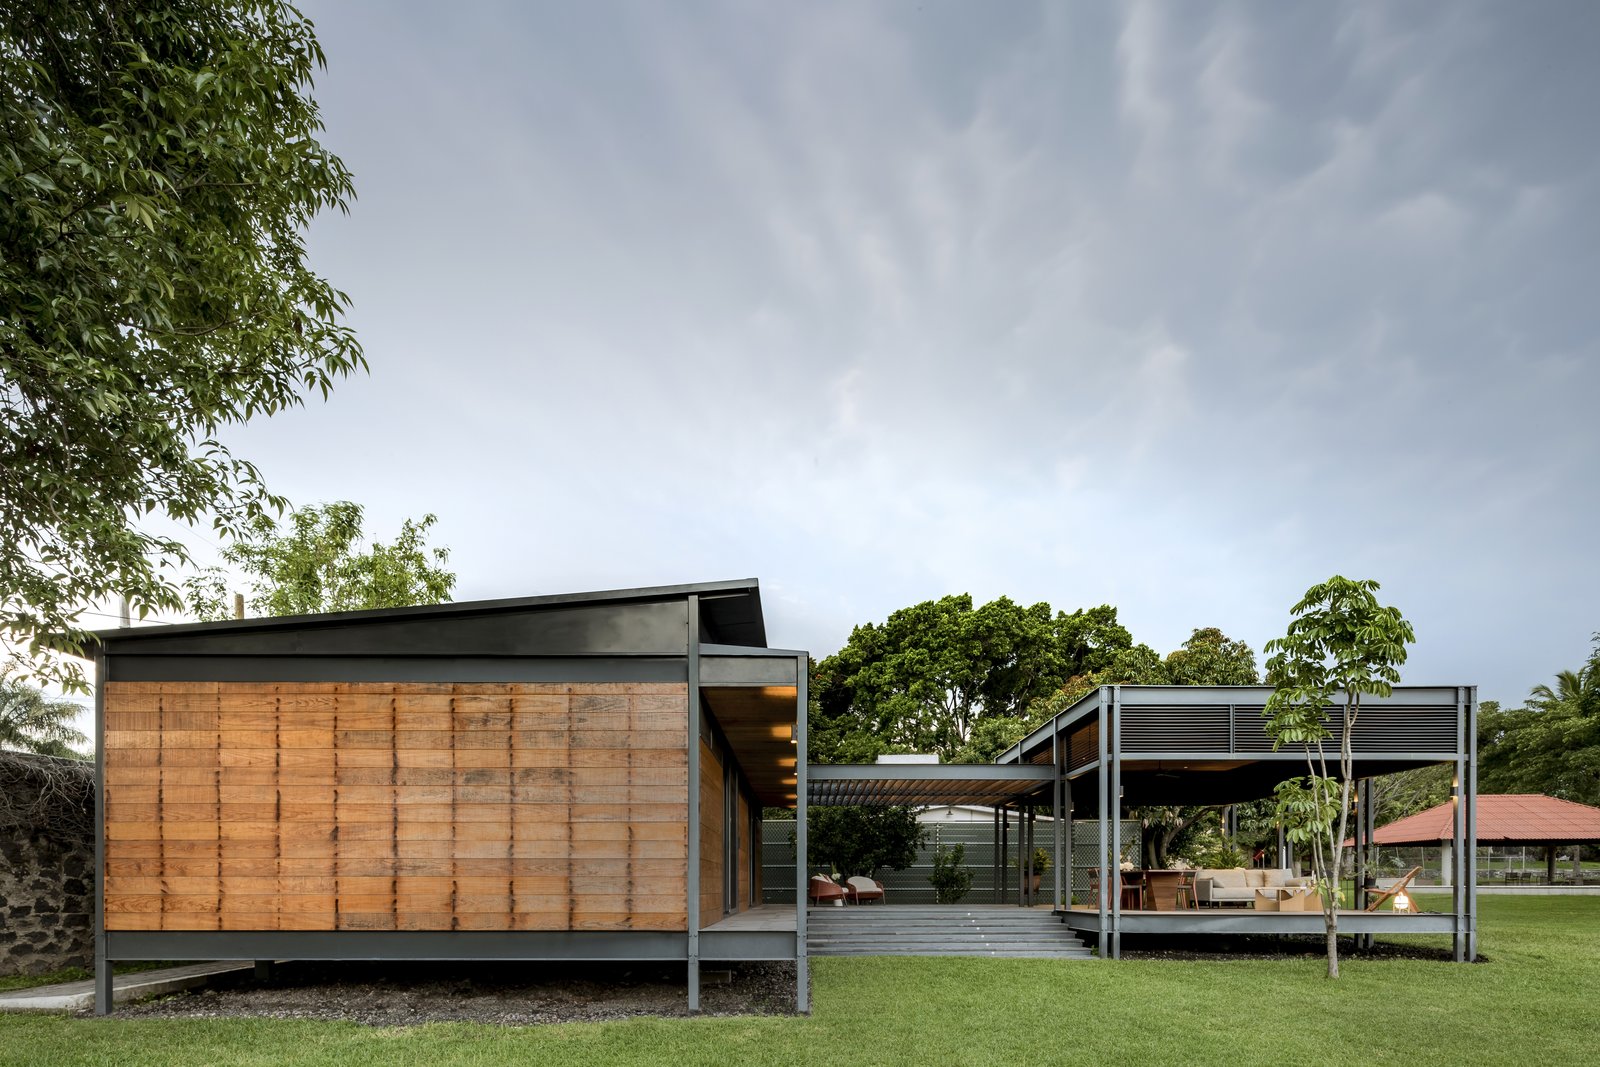 This Modern Prefab Is Now a Gorgeous Guest House